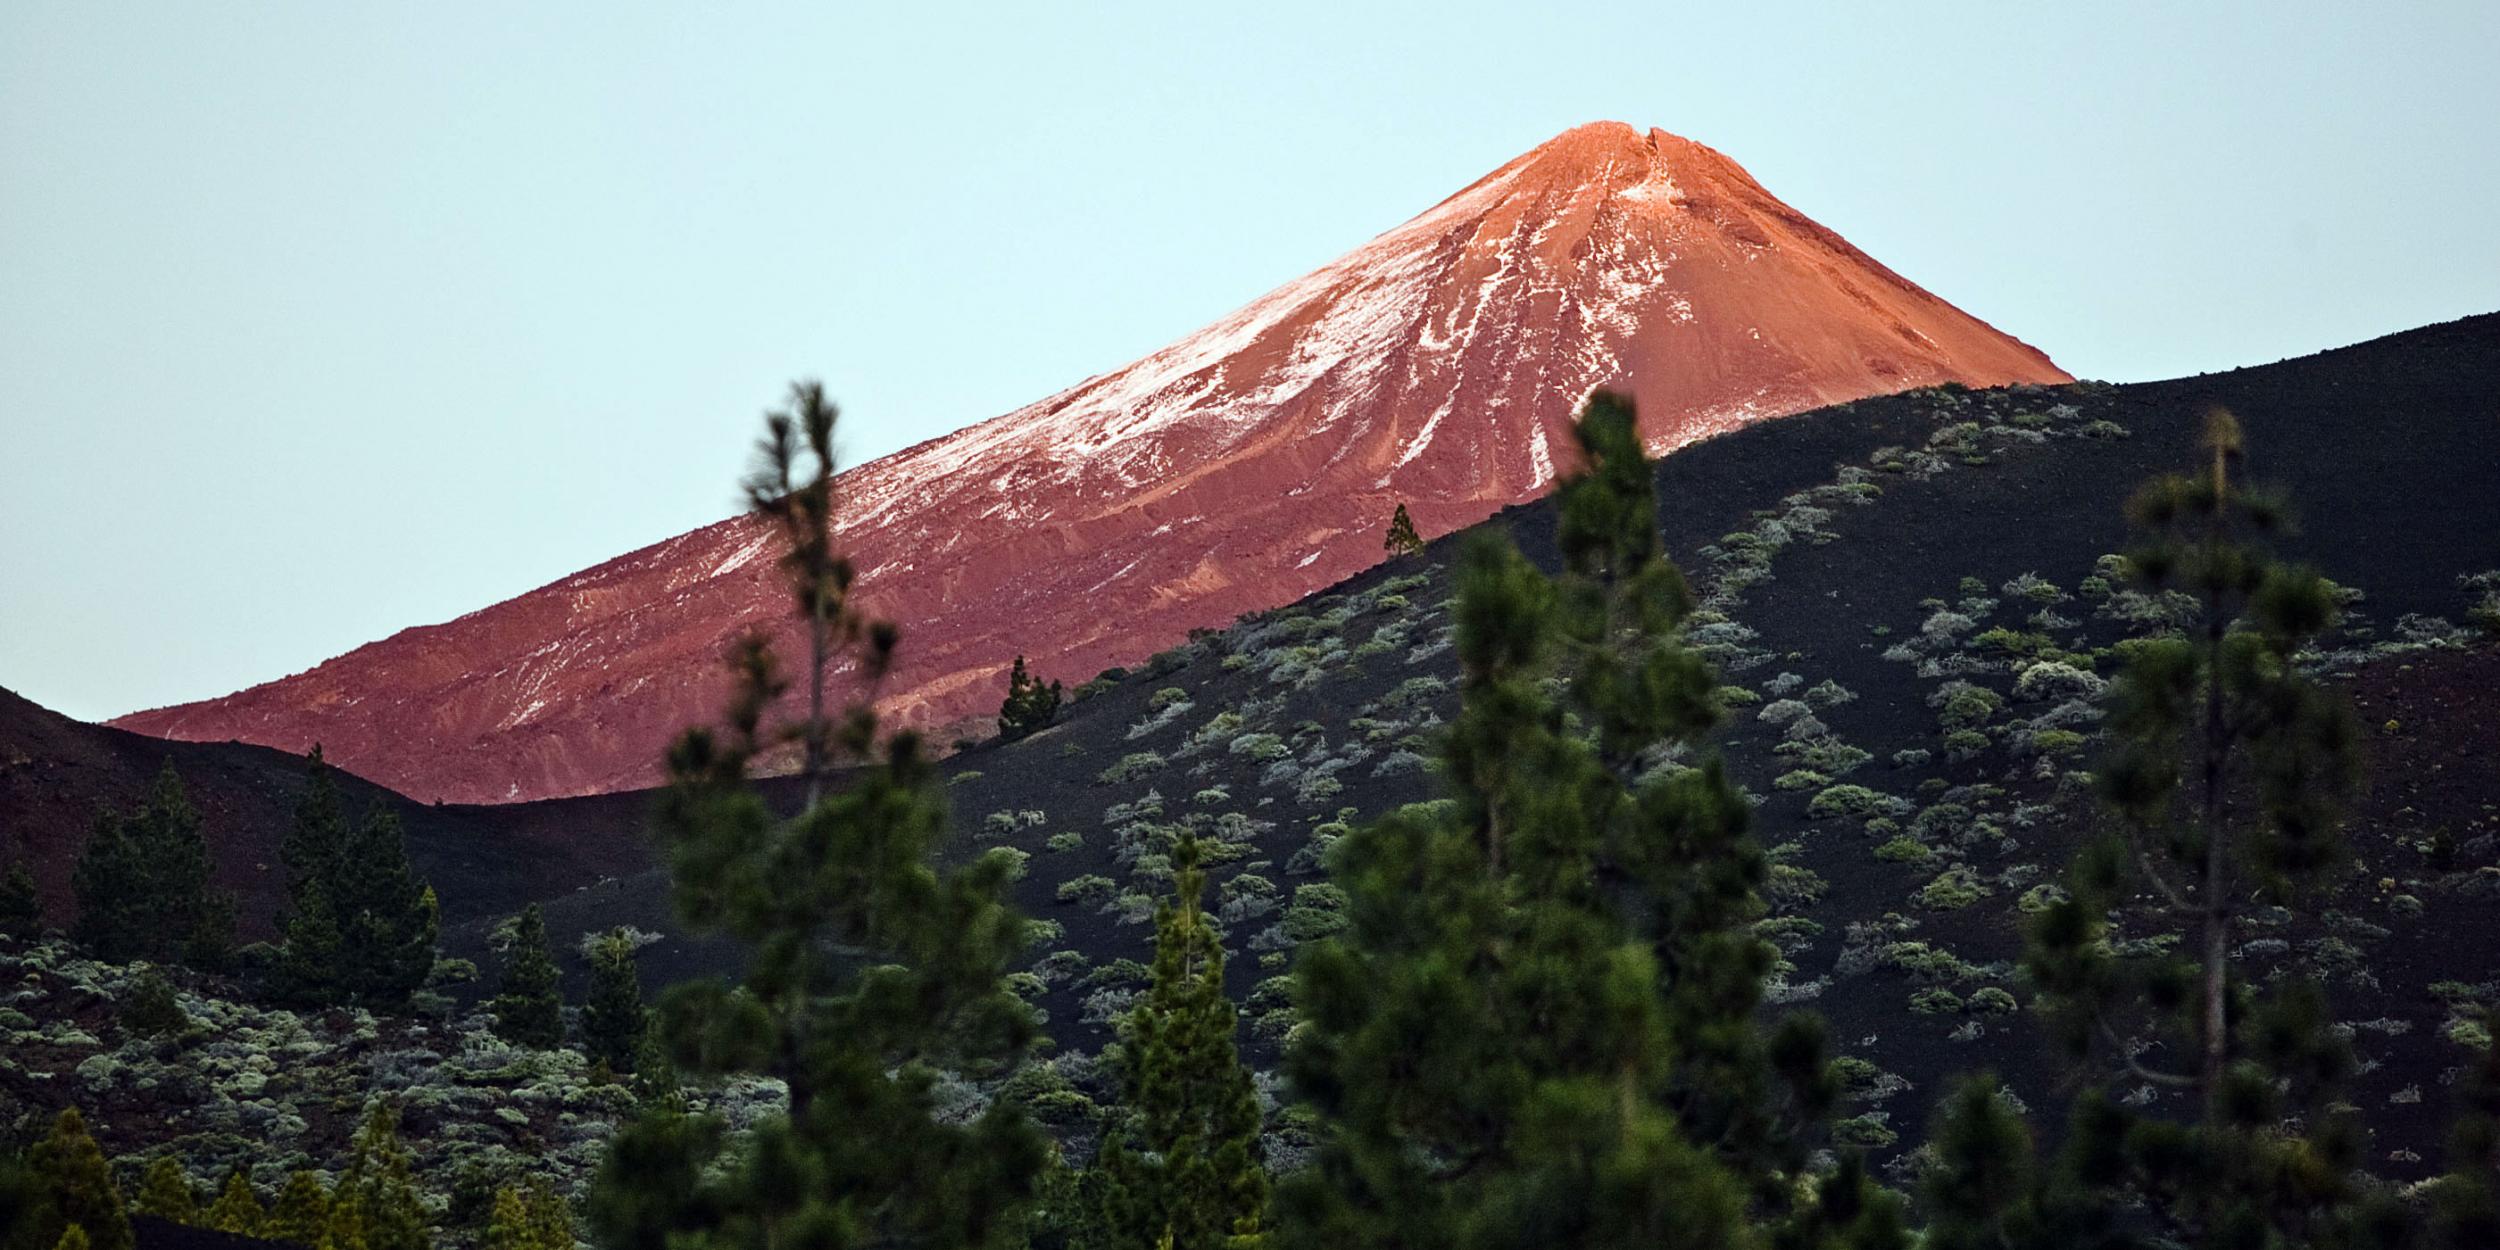 The snow-capped summit of the Pico del Teide volcano at sunset, Teide National Park, Canaries